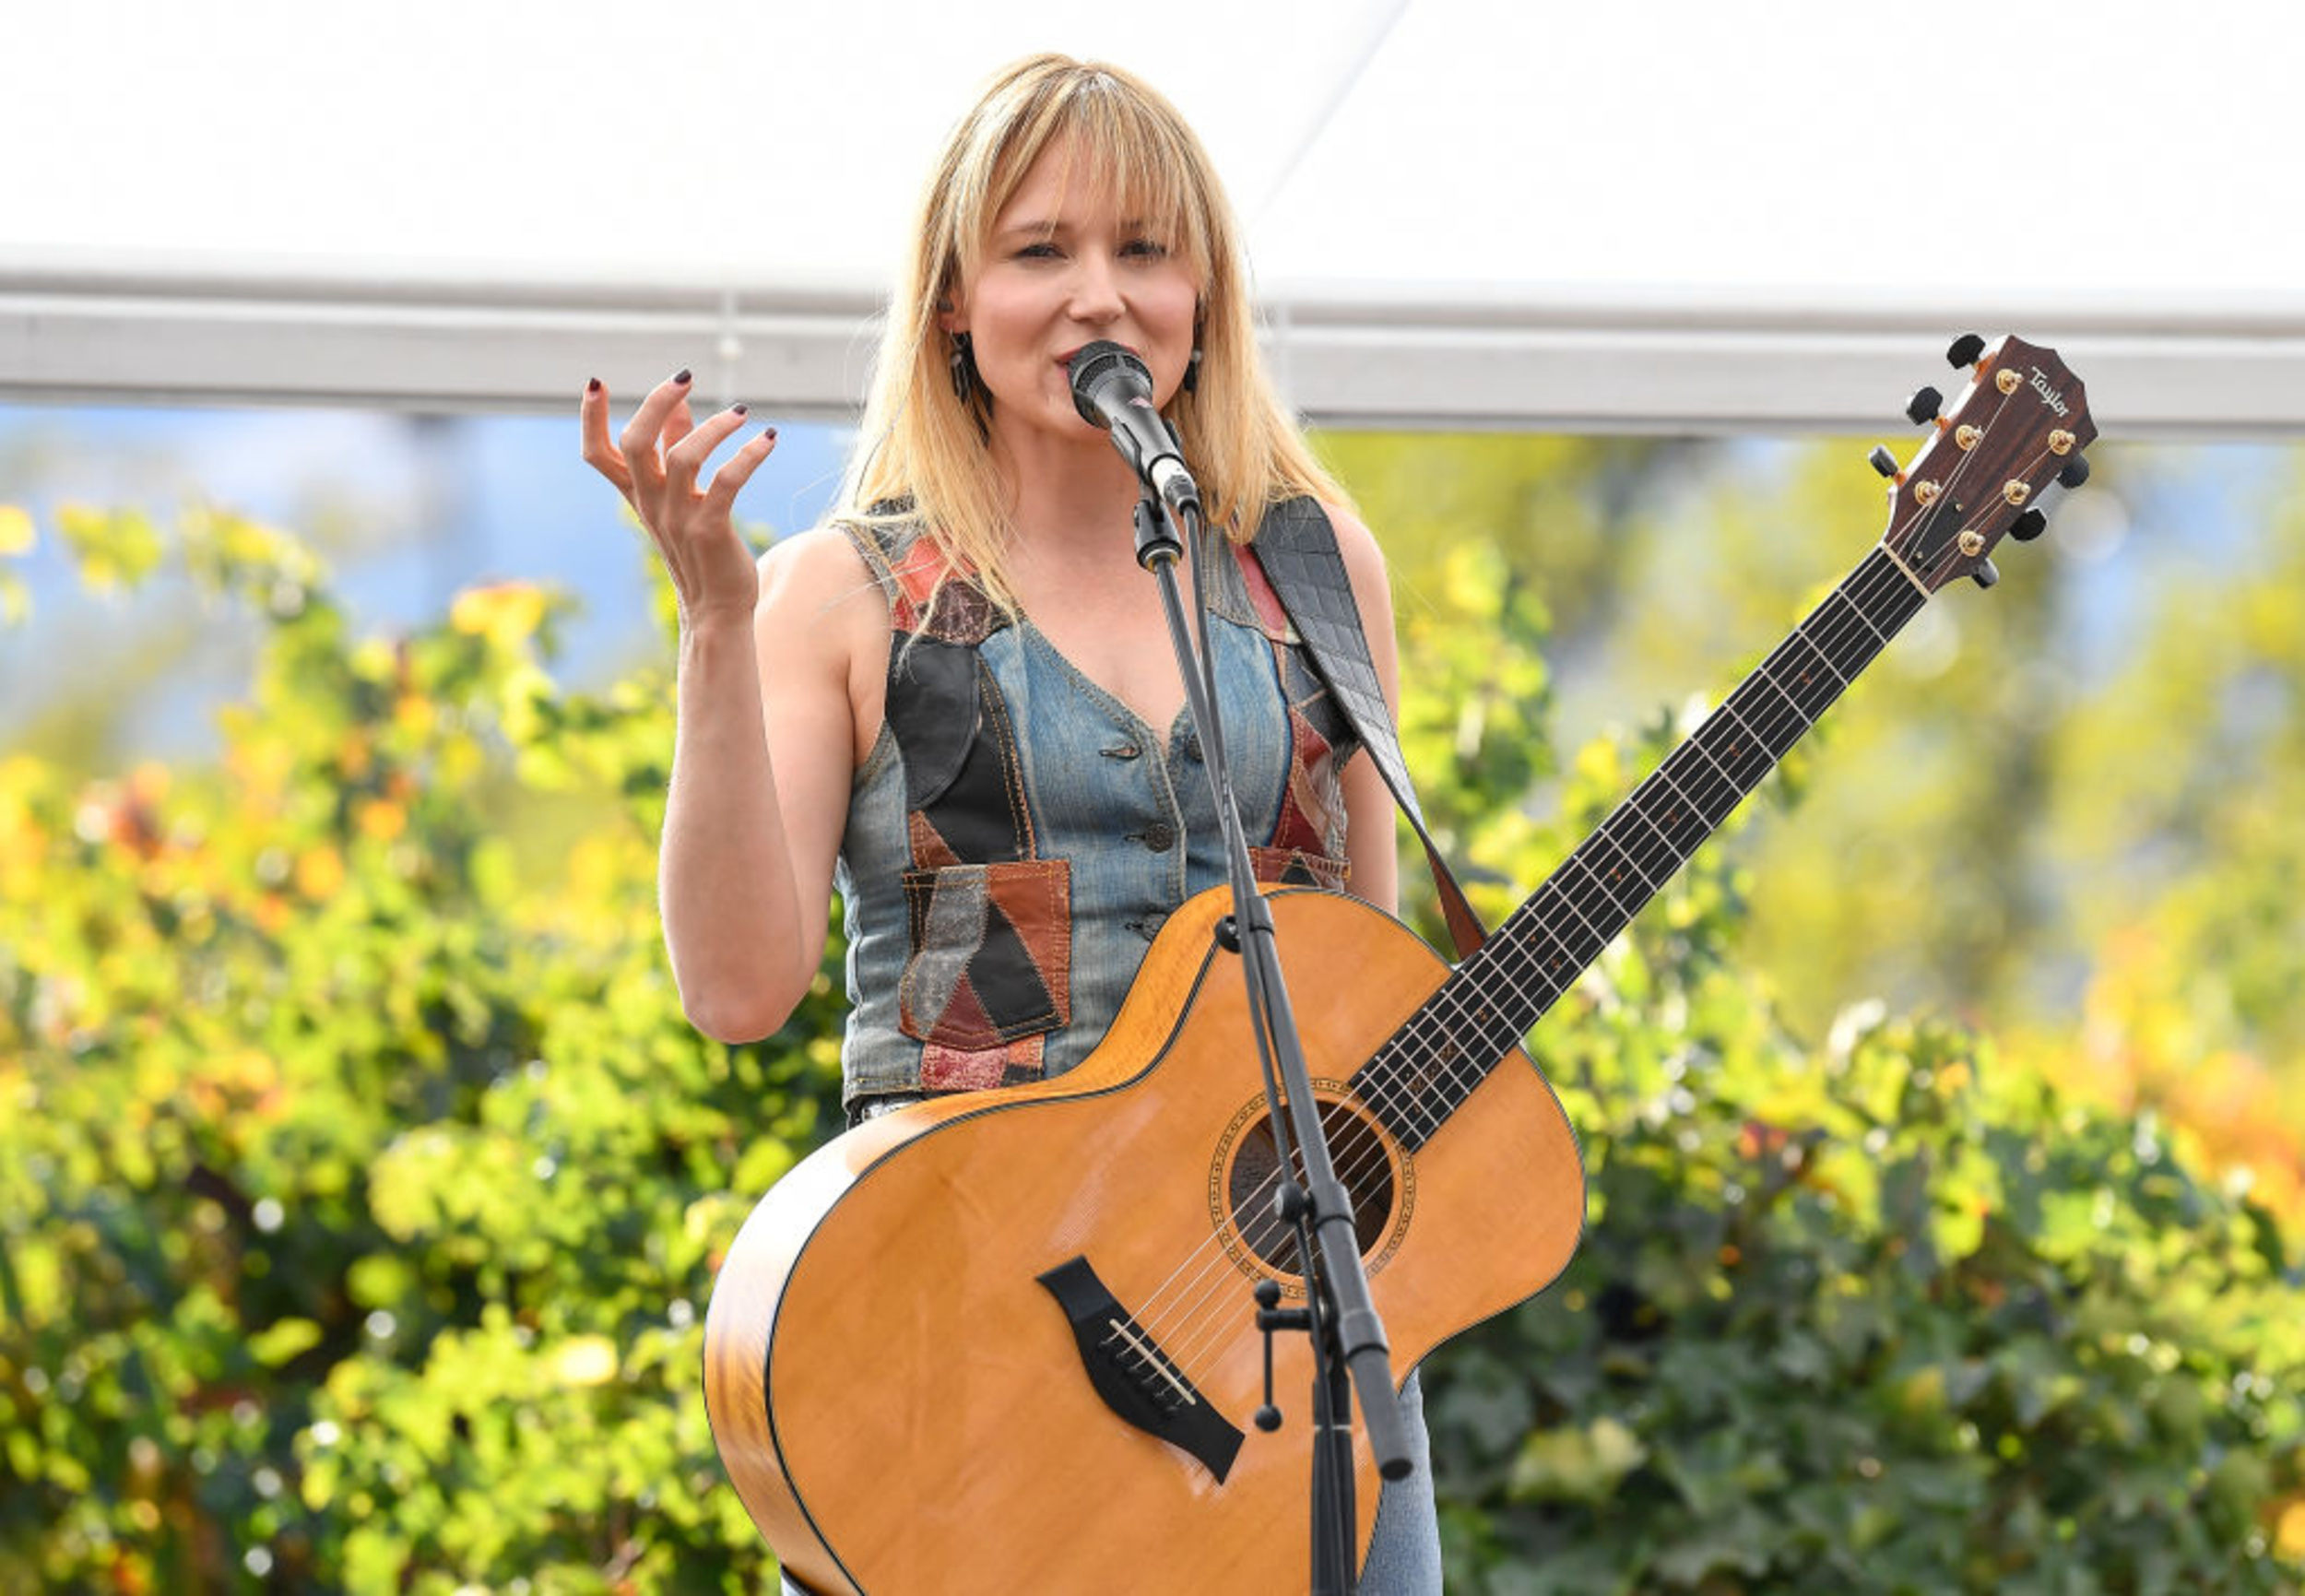 <p>Country music fans, get ready to unite as Jewel and Melissa Etheridge co-headline a tour for the summer. The North America tour is set to kick off on July 11th in Montana and will end on October 5th in Arkansas. </p><p><a href='https://www.msn.com/en-us/community/channel/vid-cj9pqbr0vn9in2b6ddcd8sfgpfq6x6utp44fssrv6mc2gtybw0us'>Did you enjoy this slideshow? Follow us on MSN to see more of our exclusive entertainment content.</a></p>